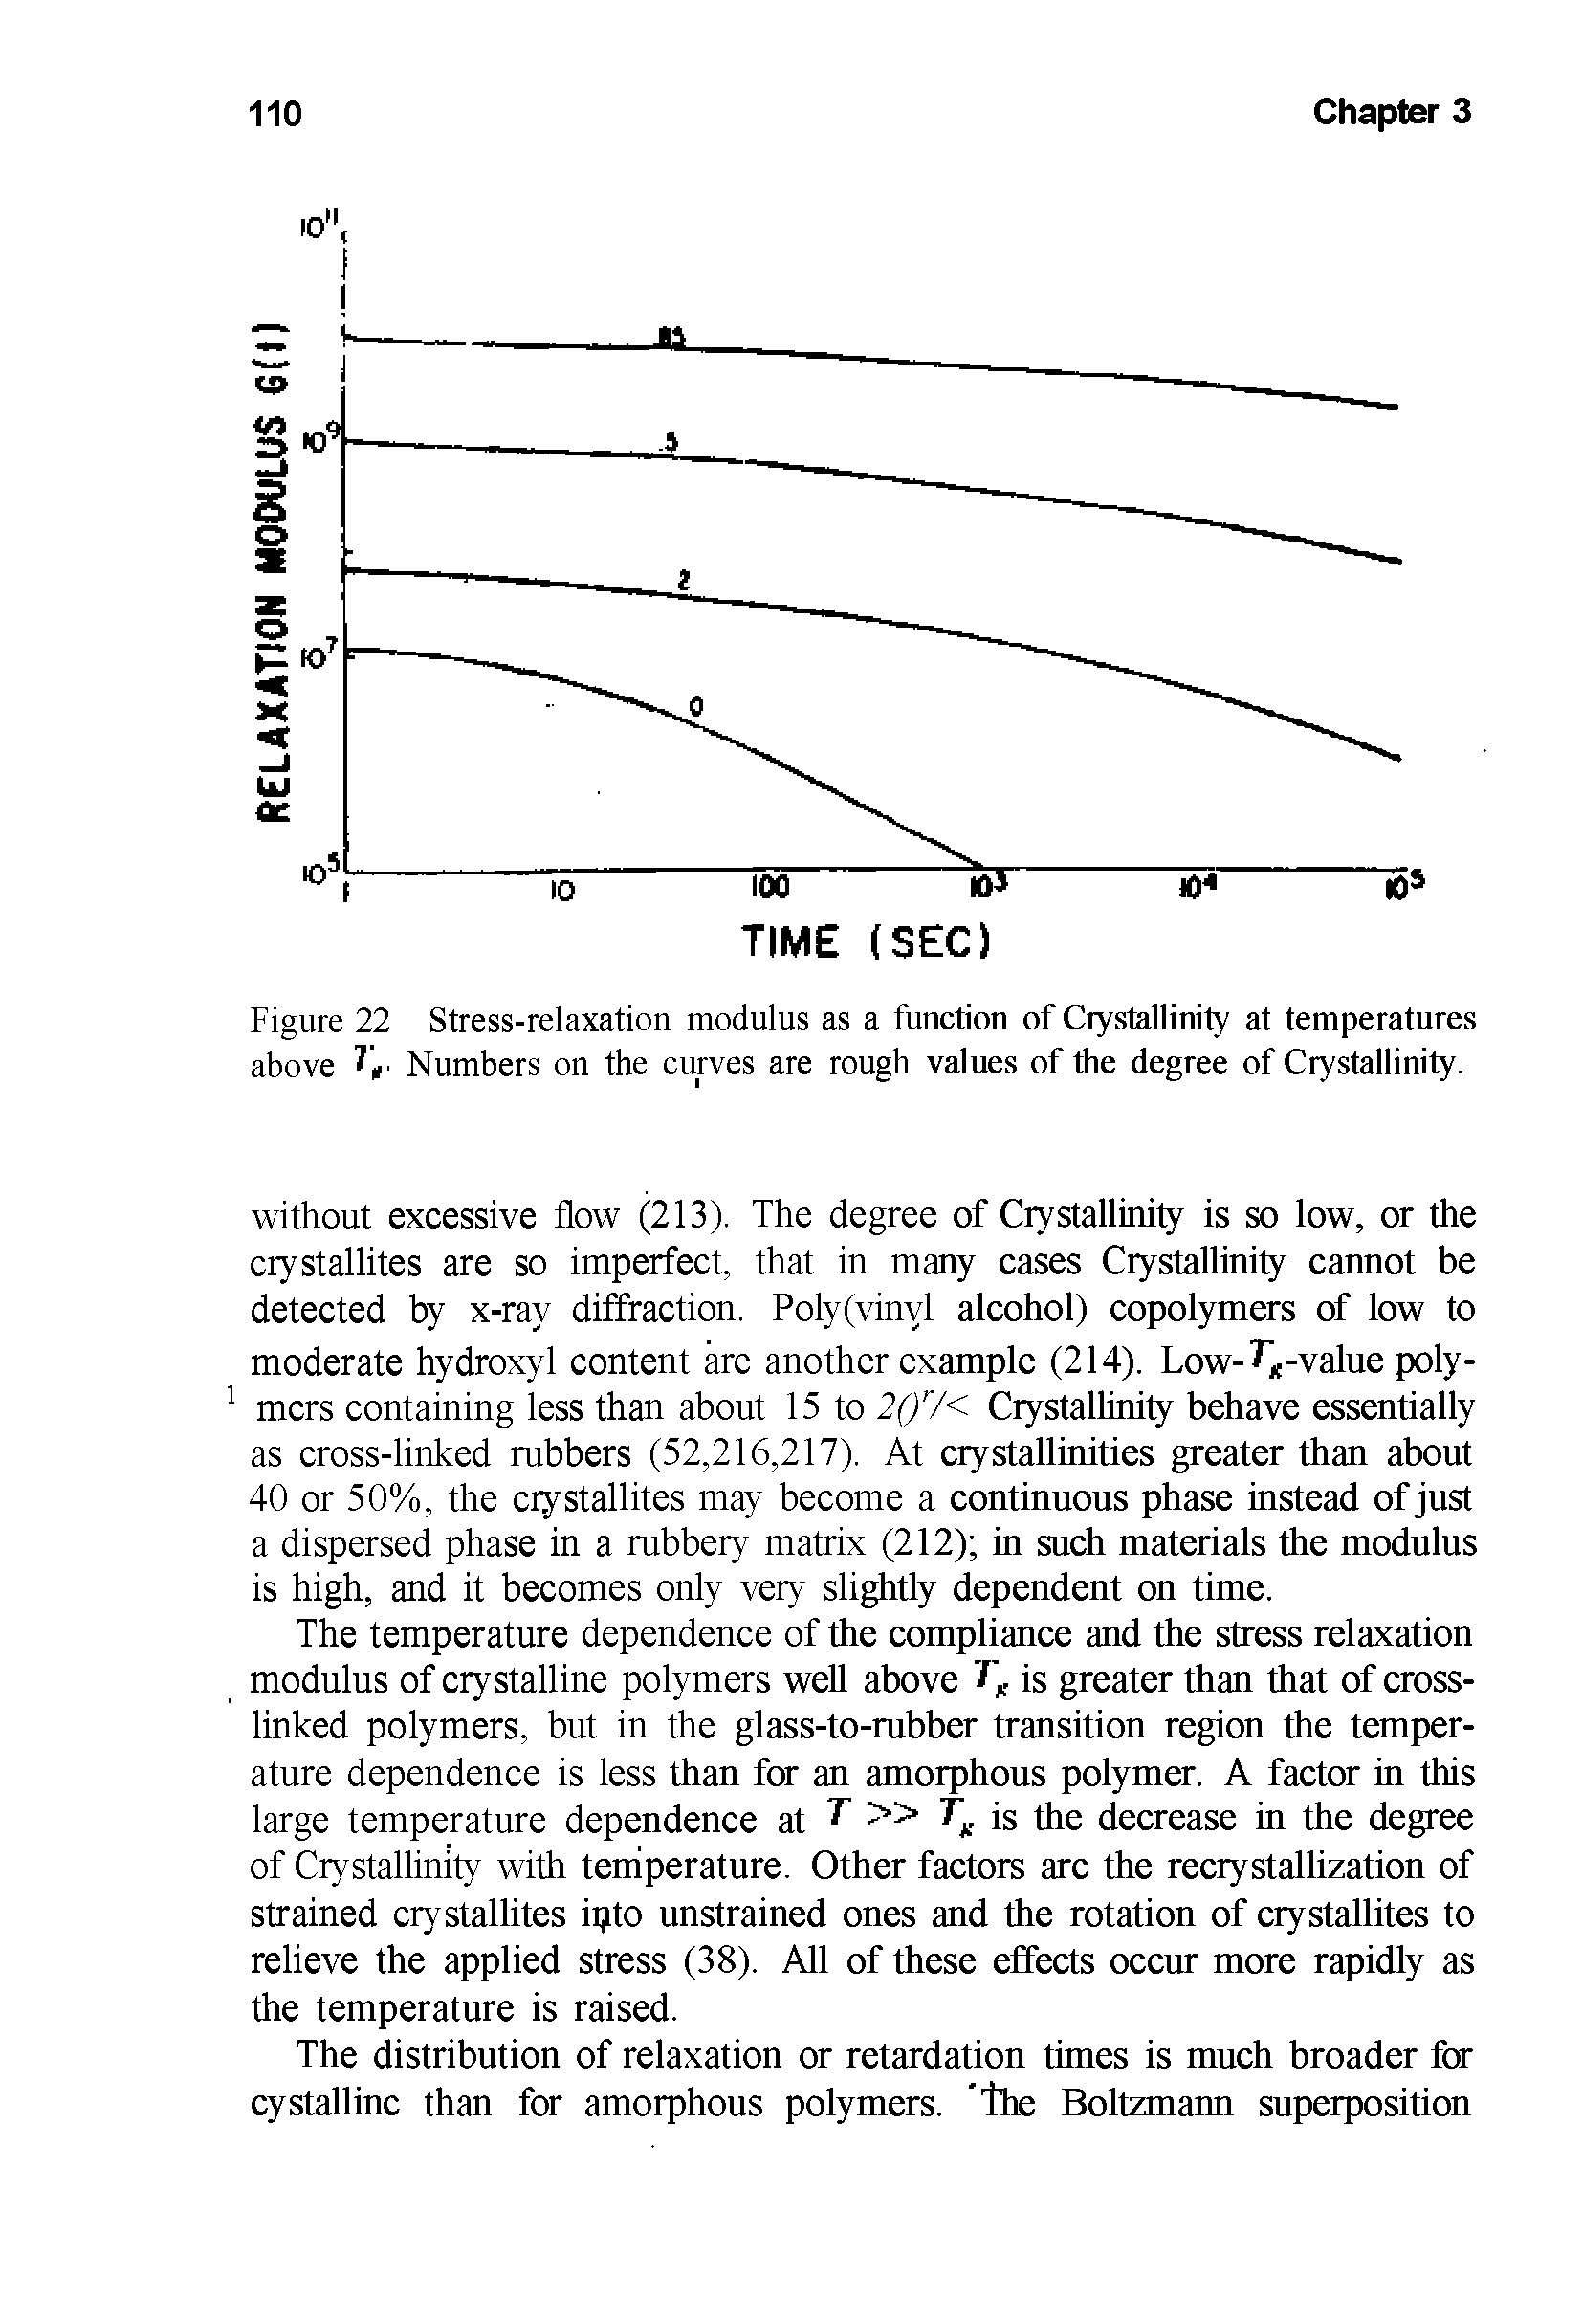 Figure 22 Stress-relaxation modulus as a function of Crystallinity at temperatures above I f Numbers on the curves are rough values of the degree of Crystallinity.